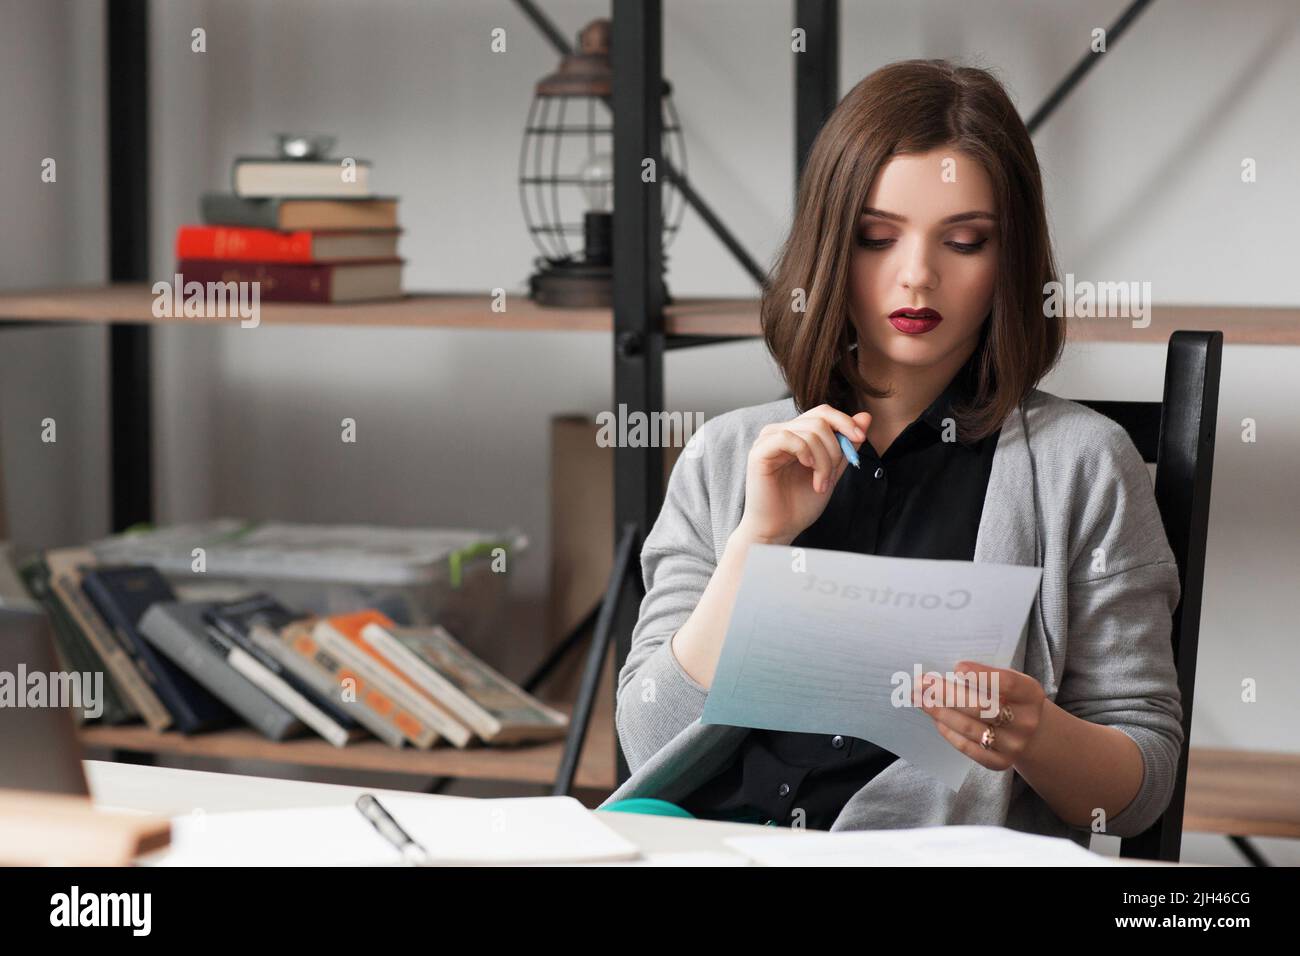 Young businesswoman working on business papers Stock Photo